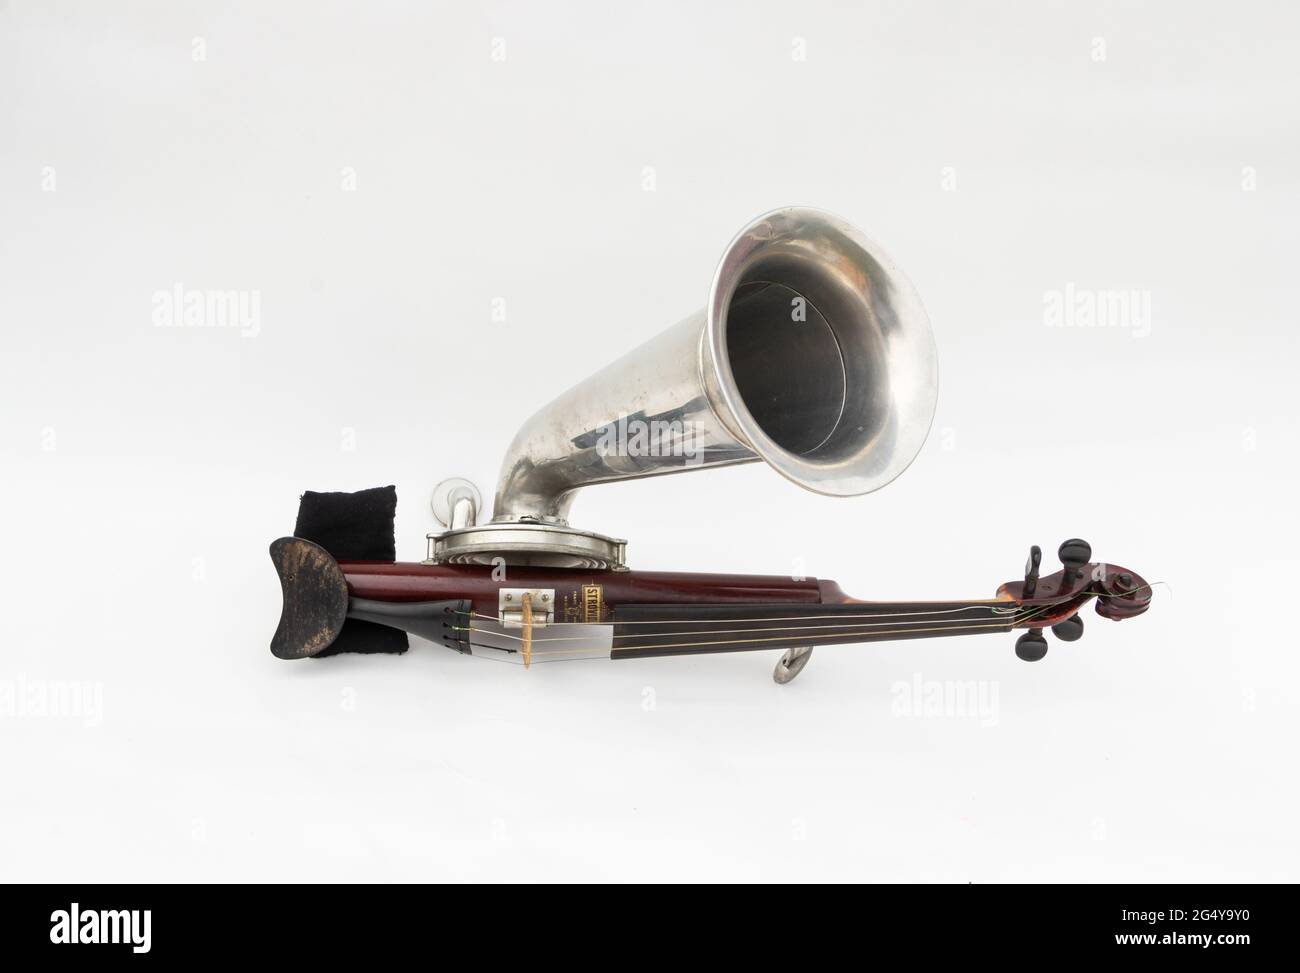 A Stroh violin or phonofiddle or musical recording instrument on a white studio background Stock - Alamy